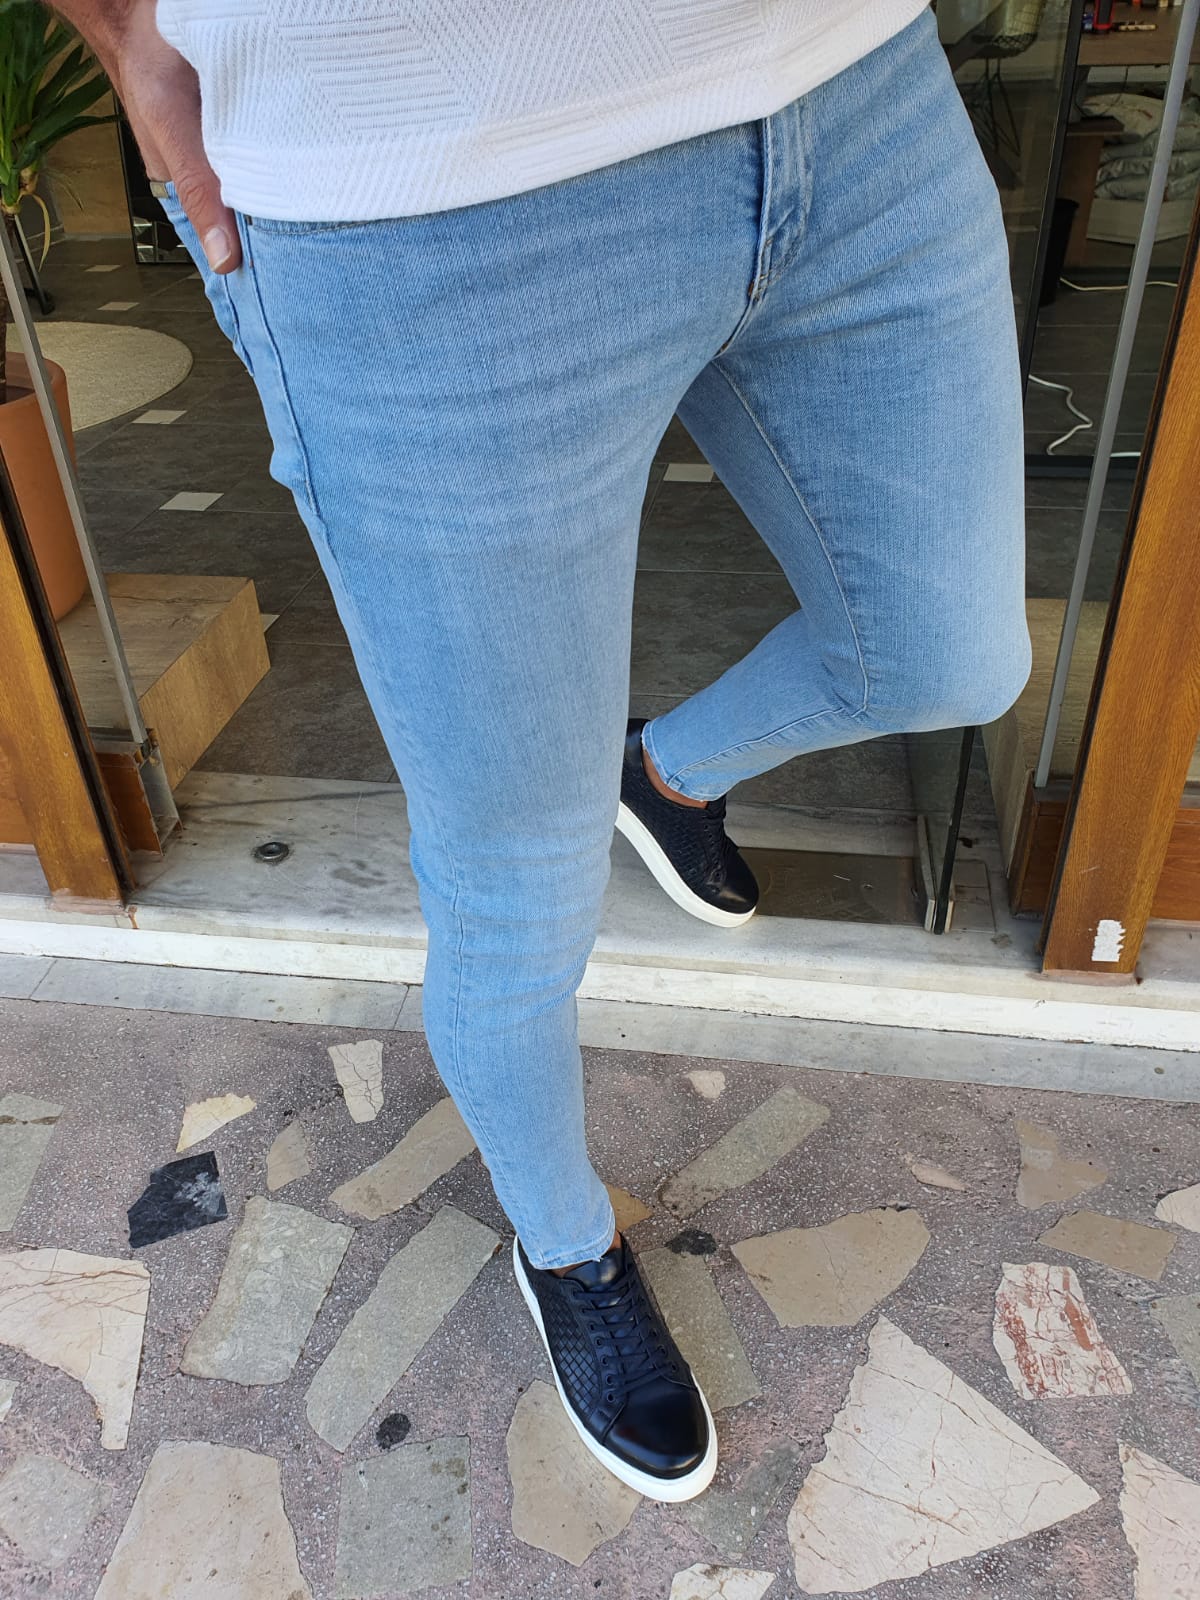 SKY BLUE SLIM-FIT SPECIAL EDITION* JEANS